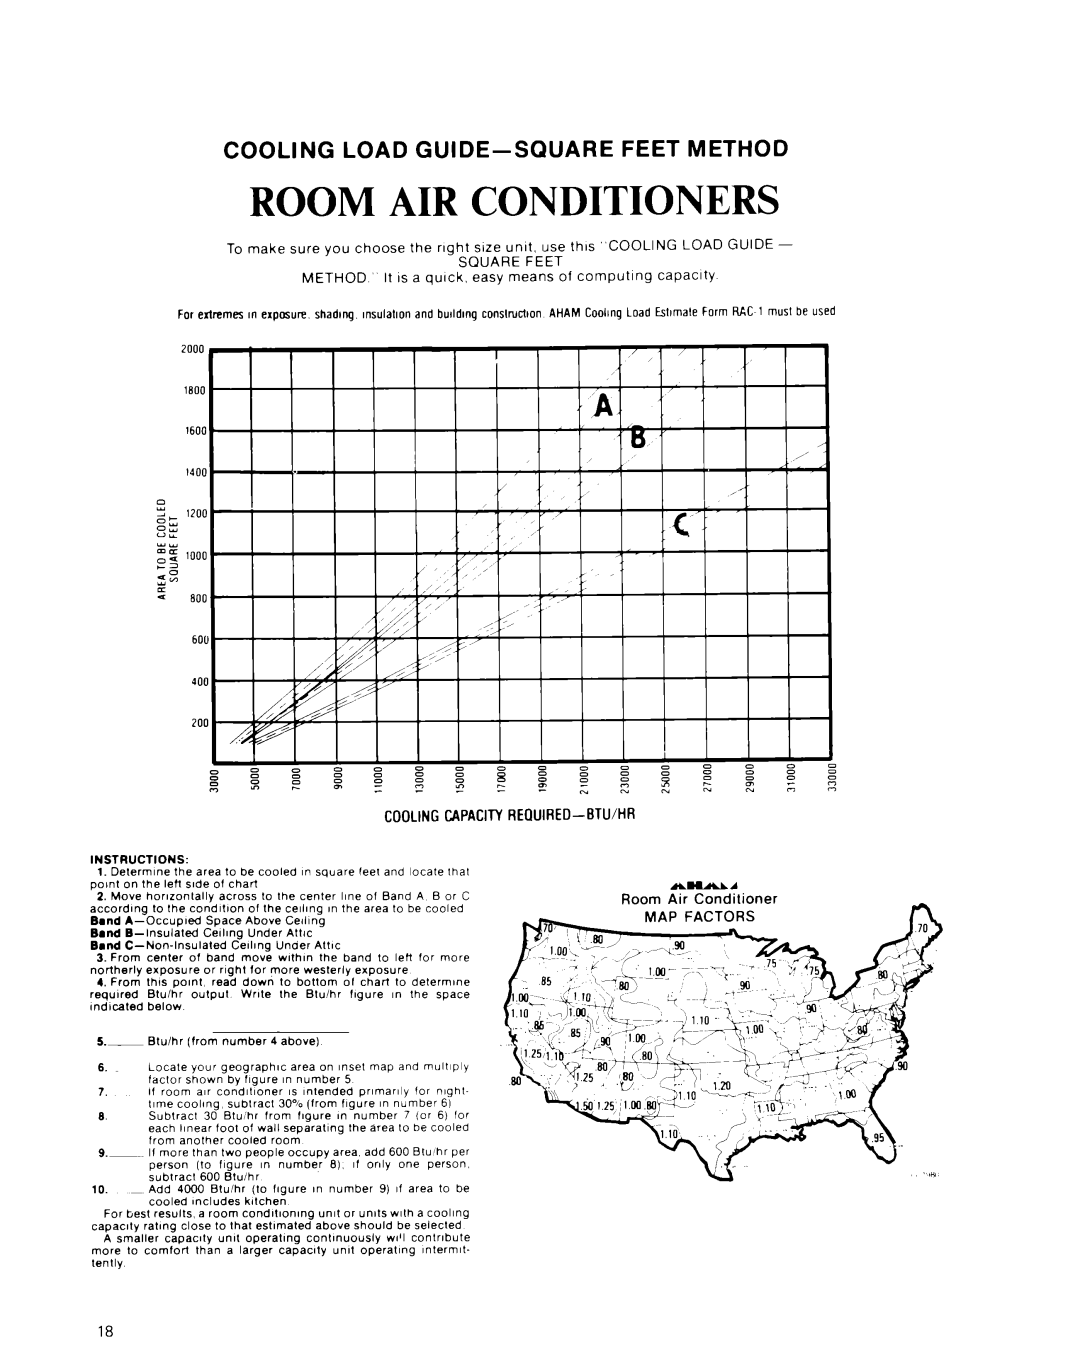 Whirlpool CAW21D2A1 manual Room Air Conditioners, Cooling Load Guide-Squarefeet Method 